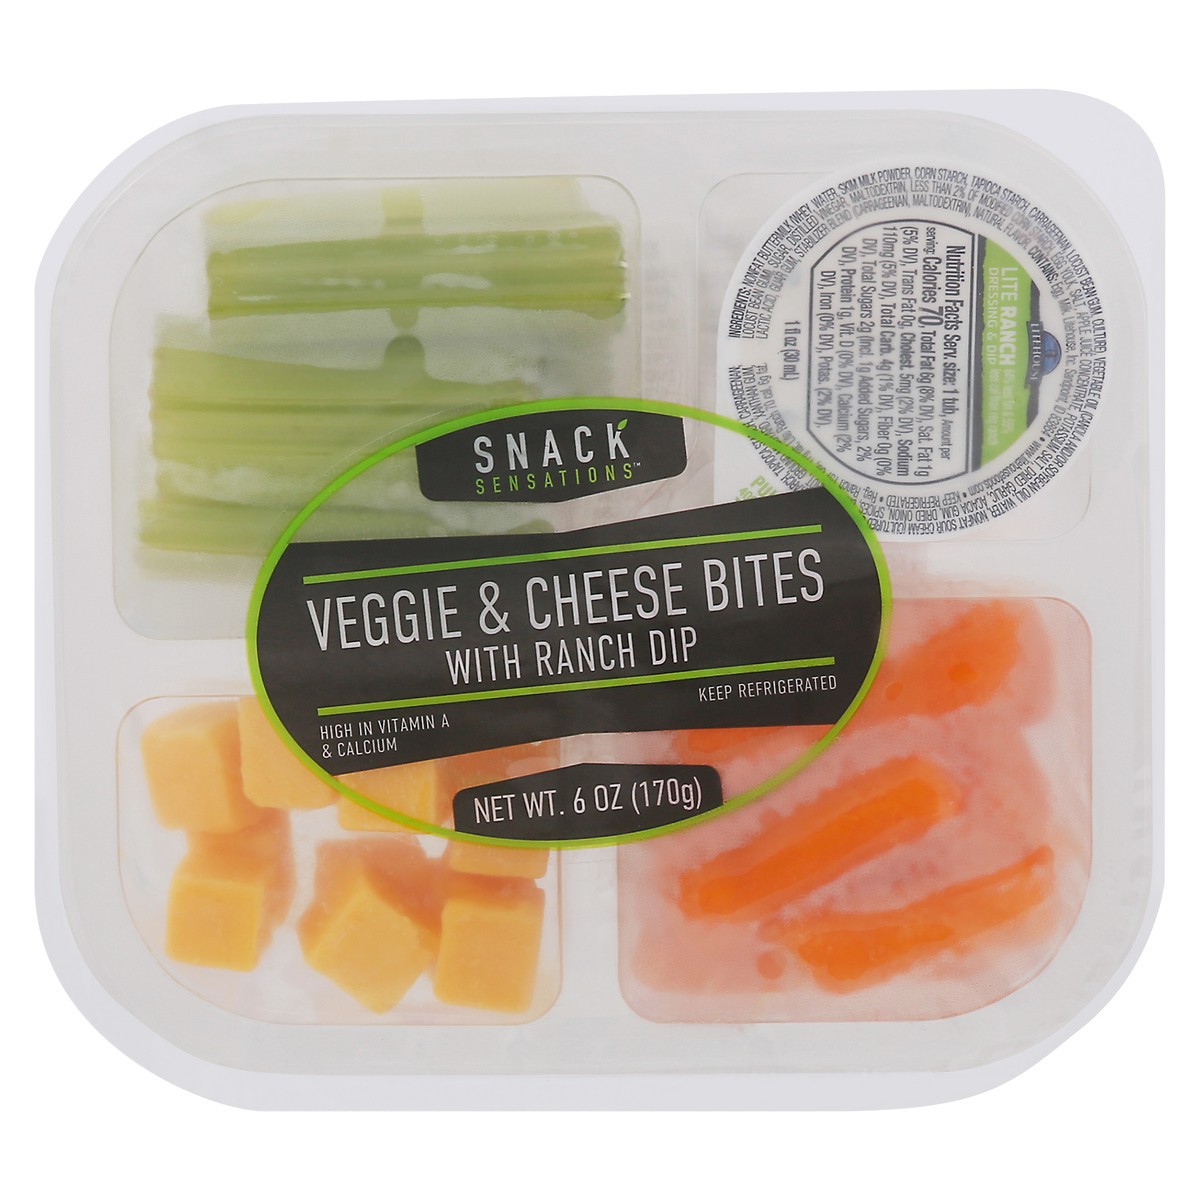 slide 1 of 11, Snack Sensations with Ranch Dip Veggie & Cheese Bites with Ranch Dip 6 oz, 6 oz